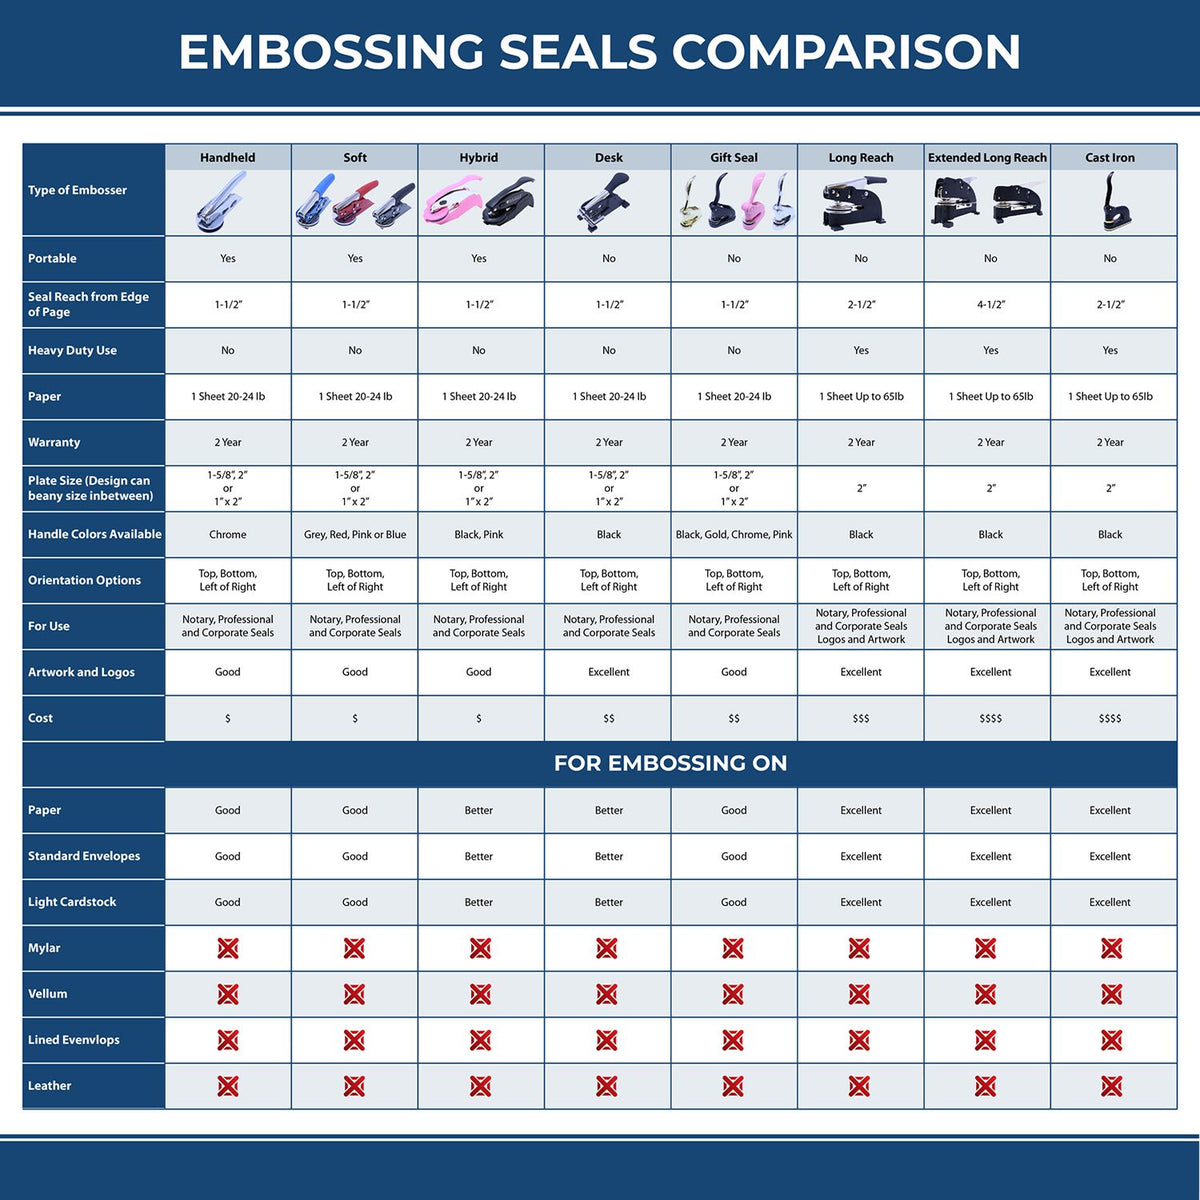 A comparison chart for the different types of mount models available for the Extended Long Reach Colorado Architect Seal Embosser.